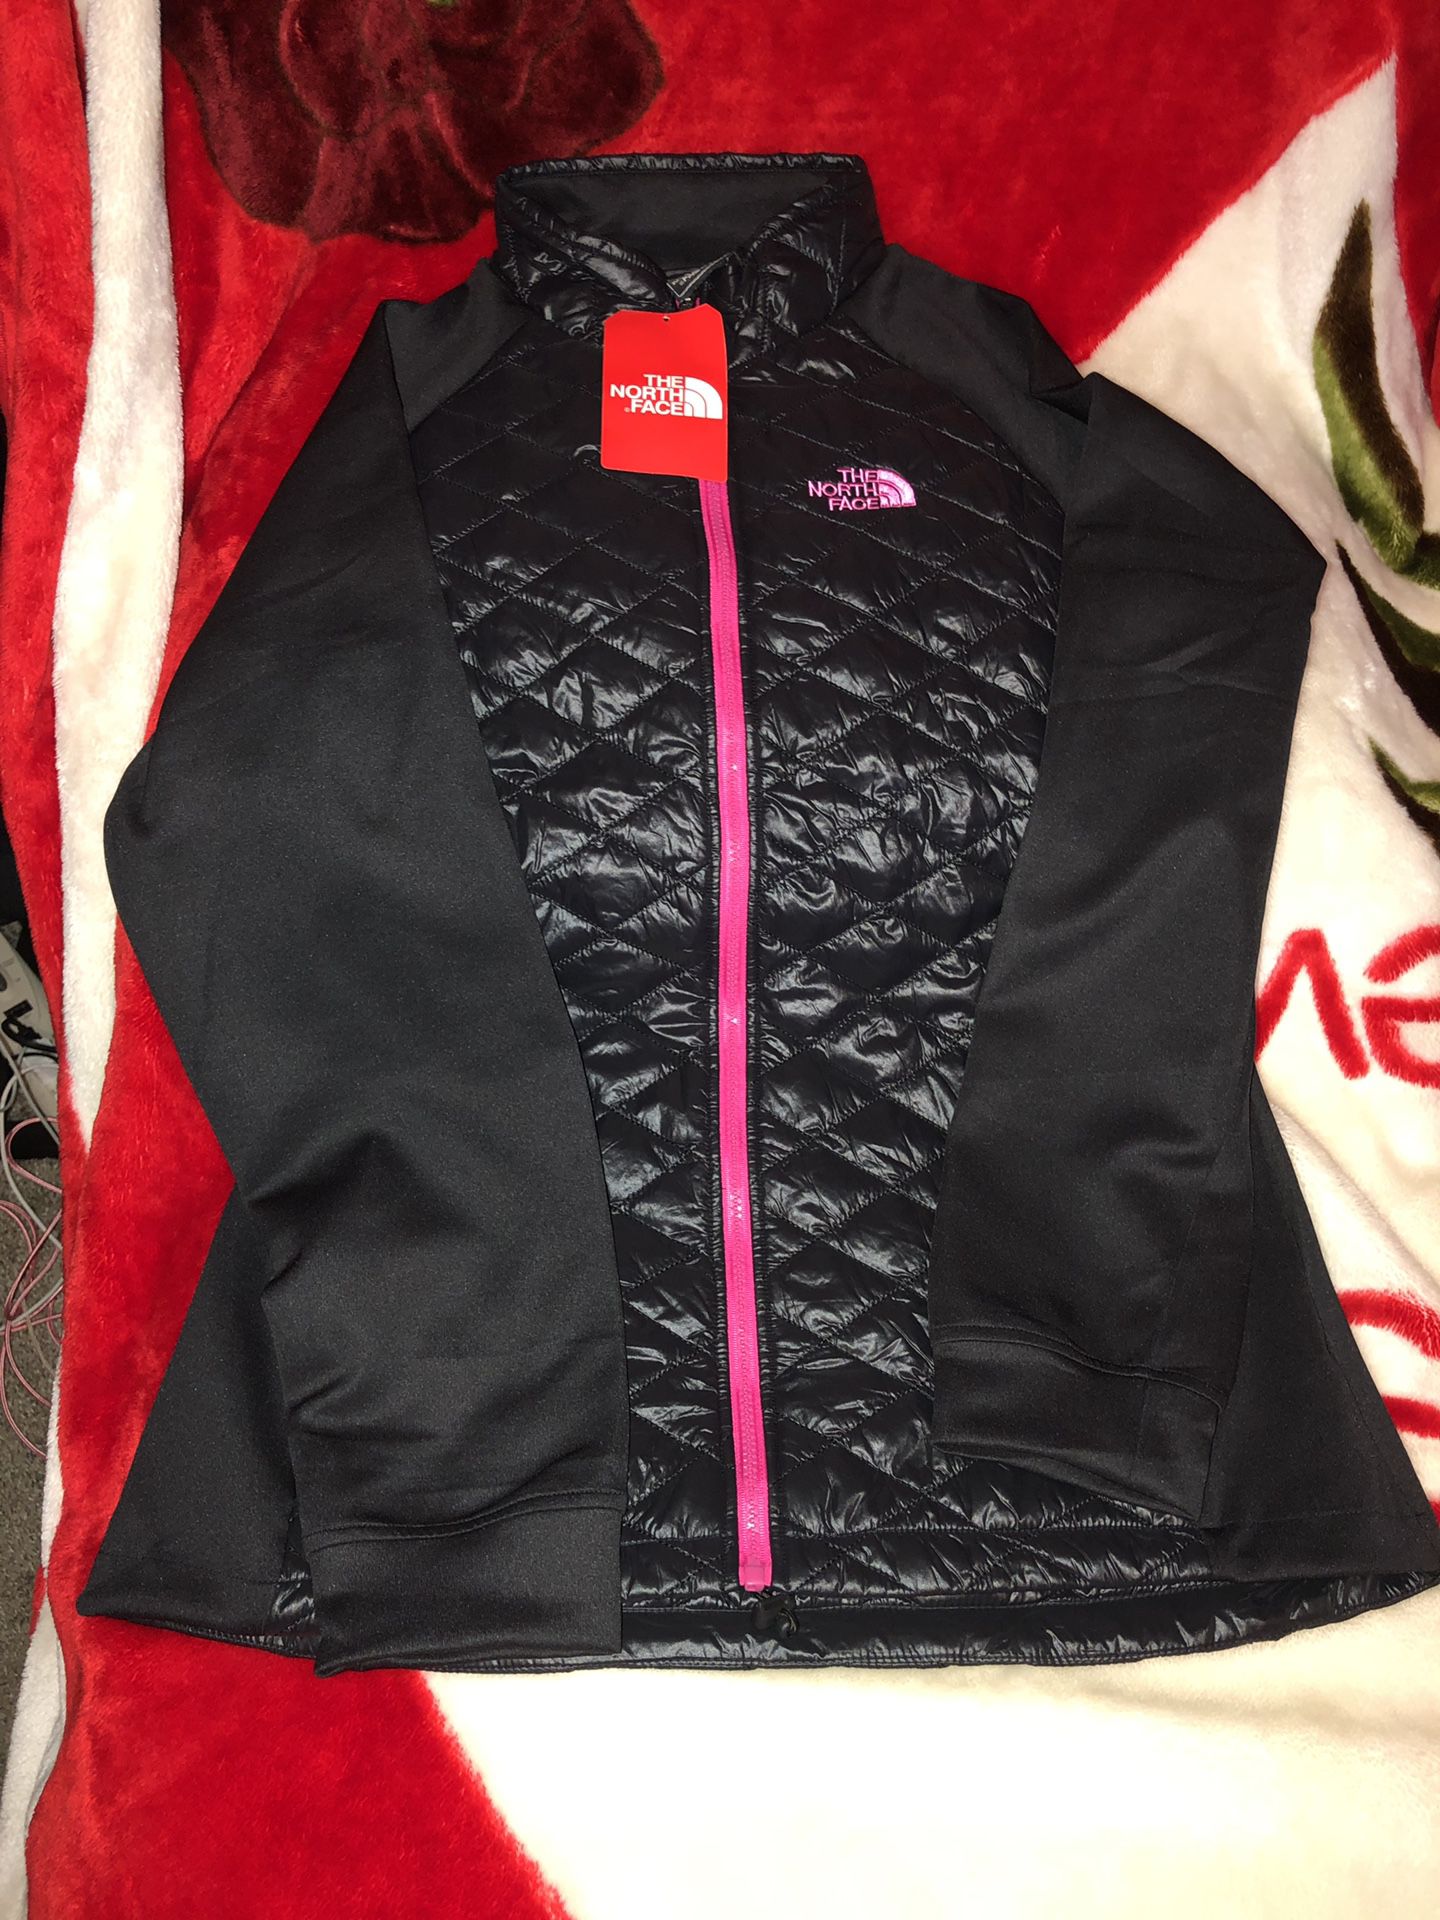 North face size 2XL